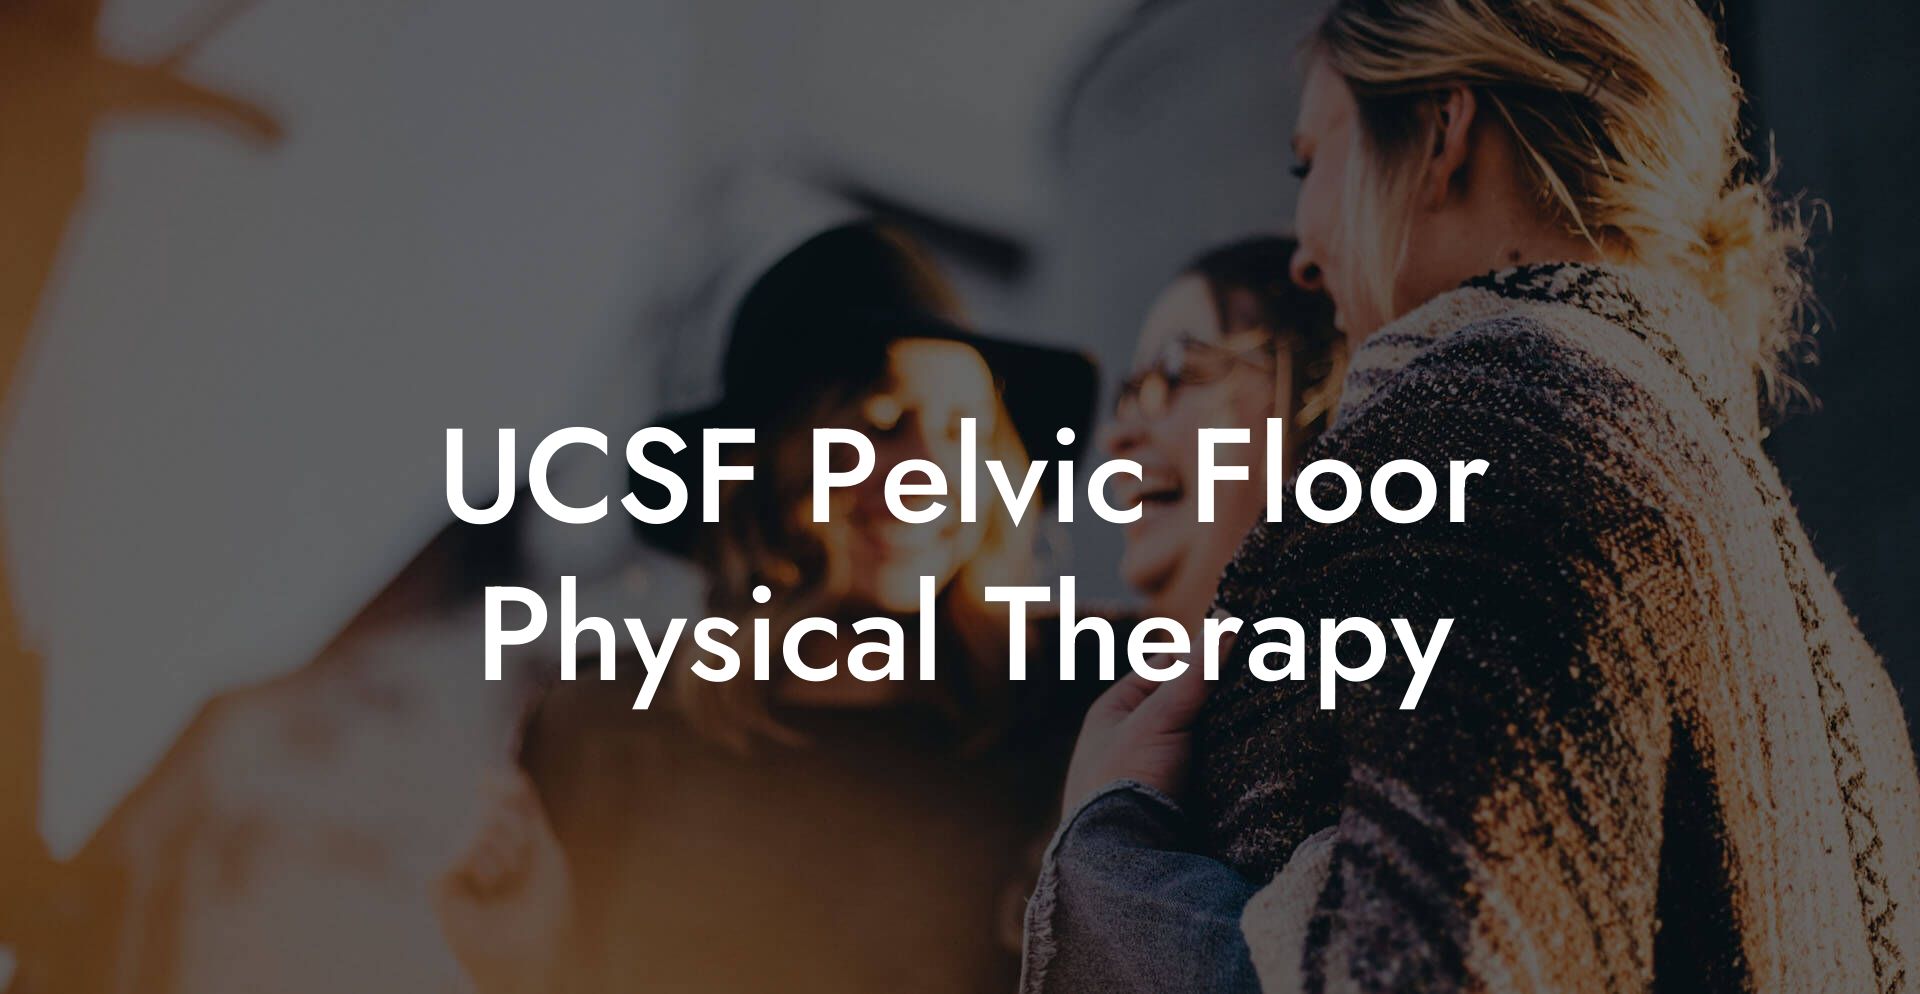 UCSF Pelvic Floor Physical Therapy